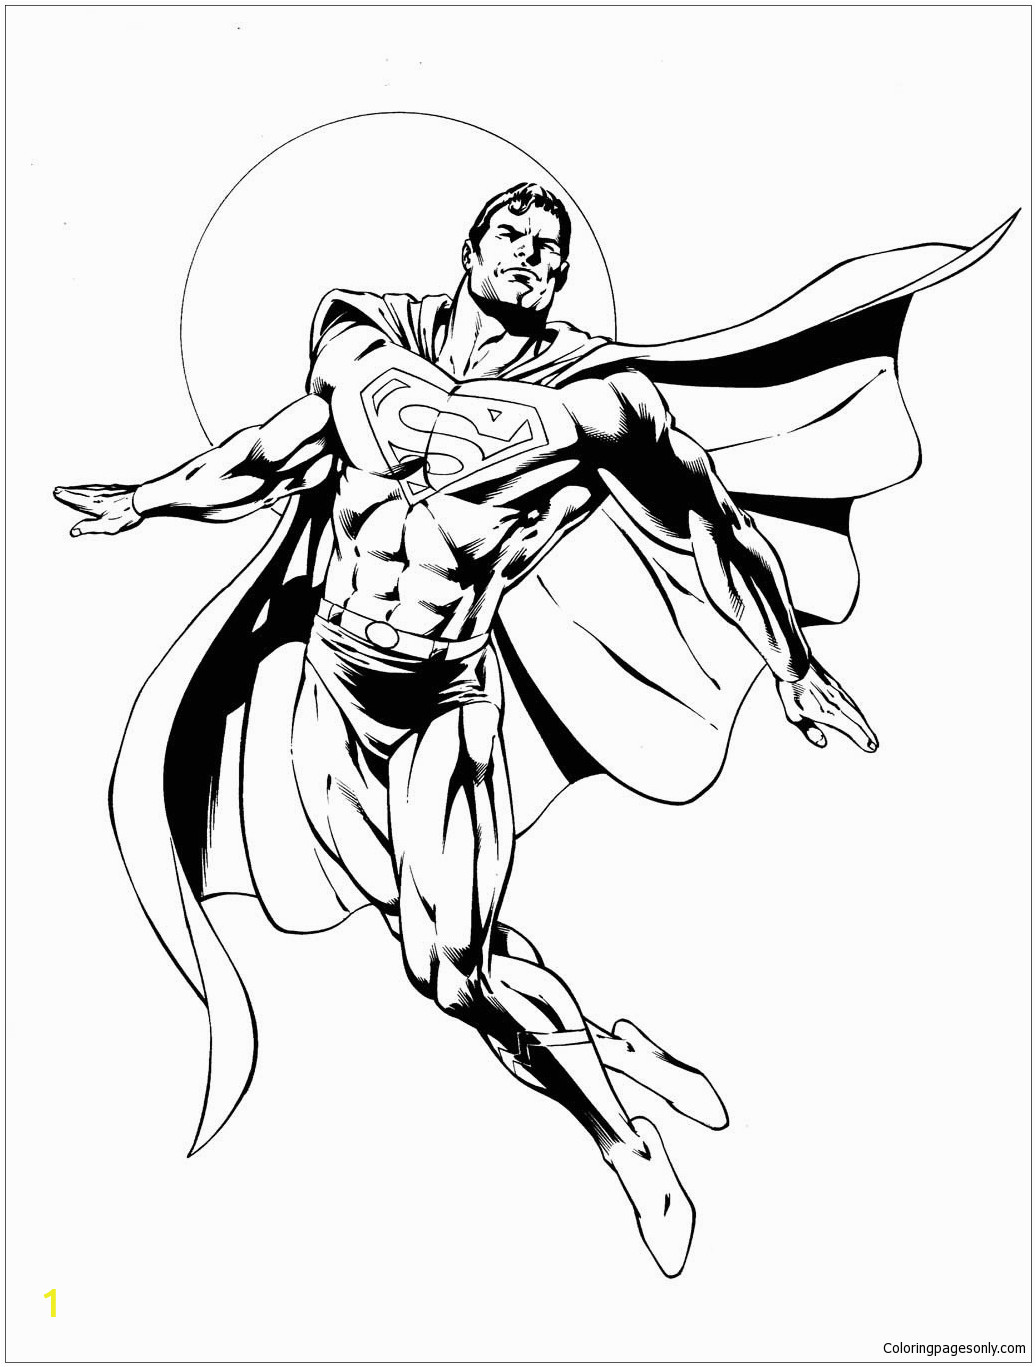 Superman Coloring Pages to Print Out Incredible Superman Coloring Page Free Coloring Pages Line